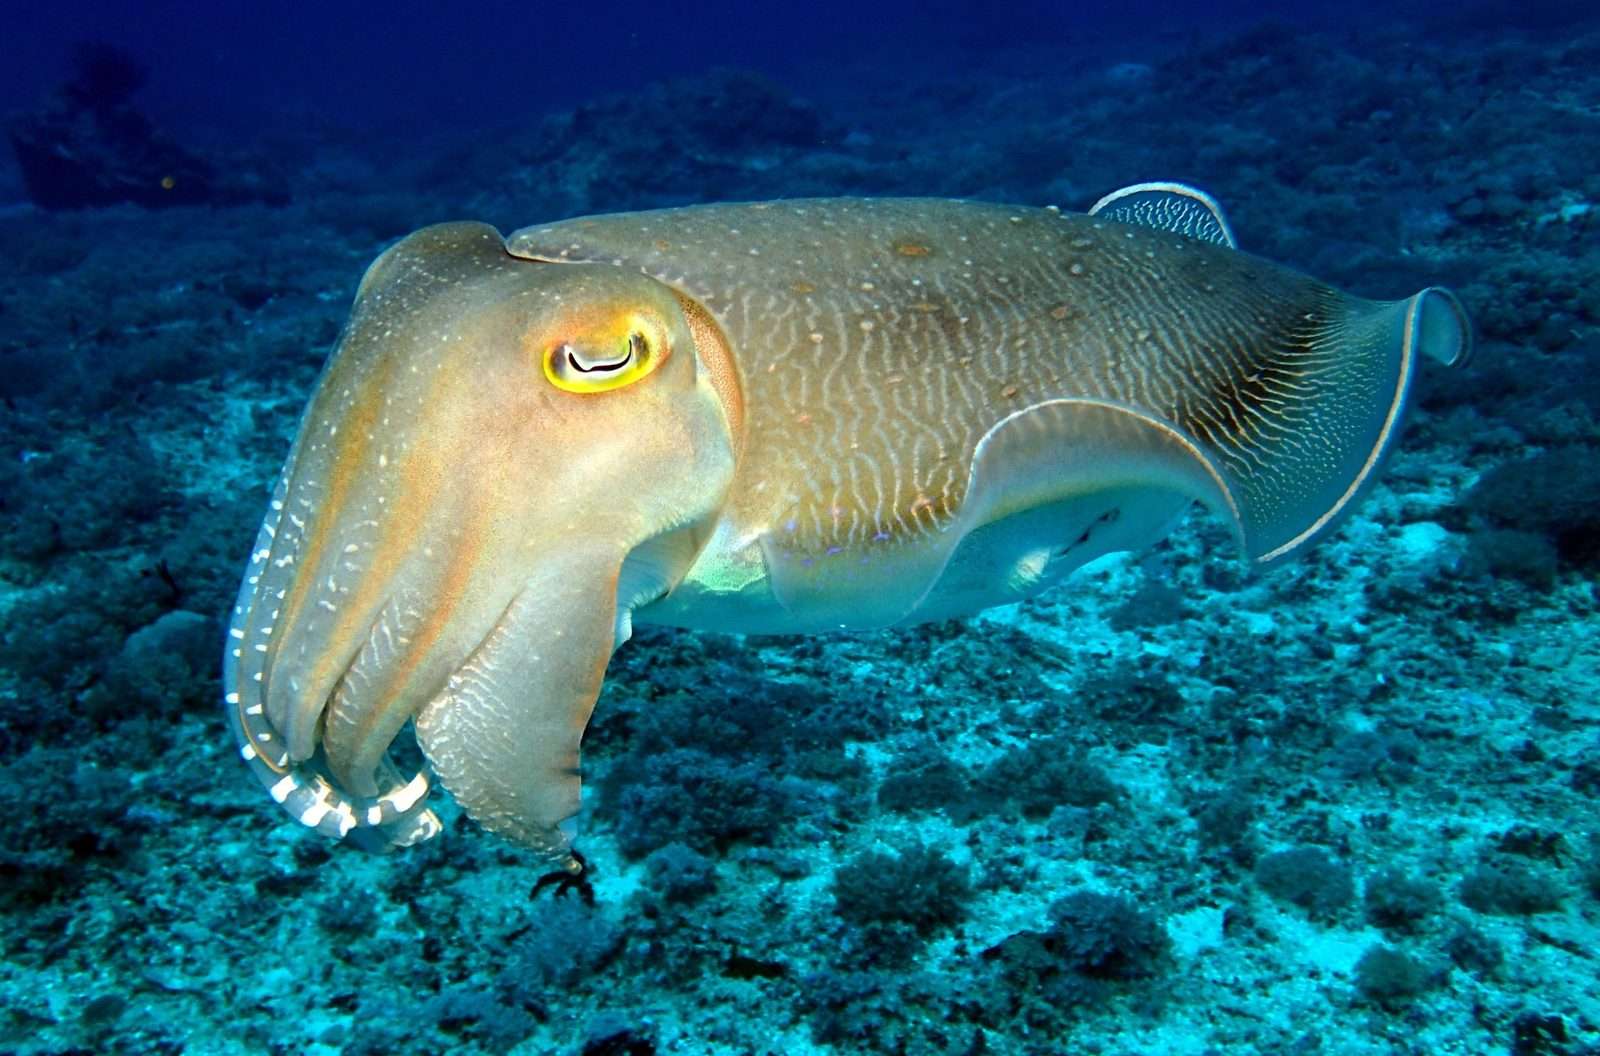 How Do Cuttlefish Change Color